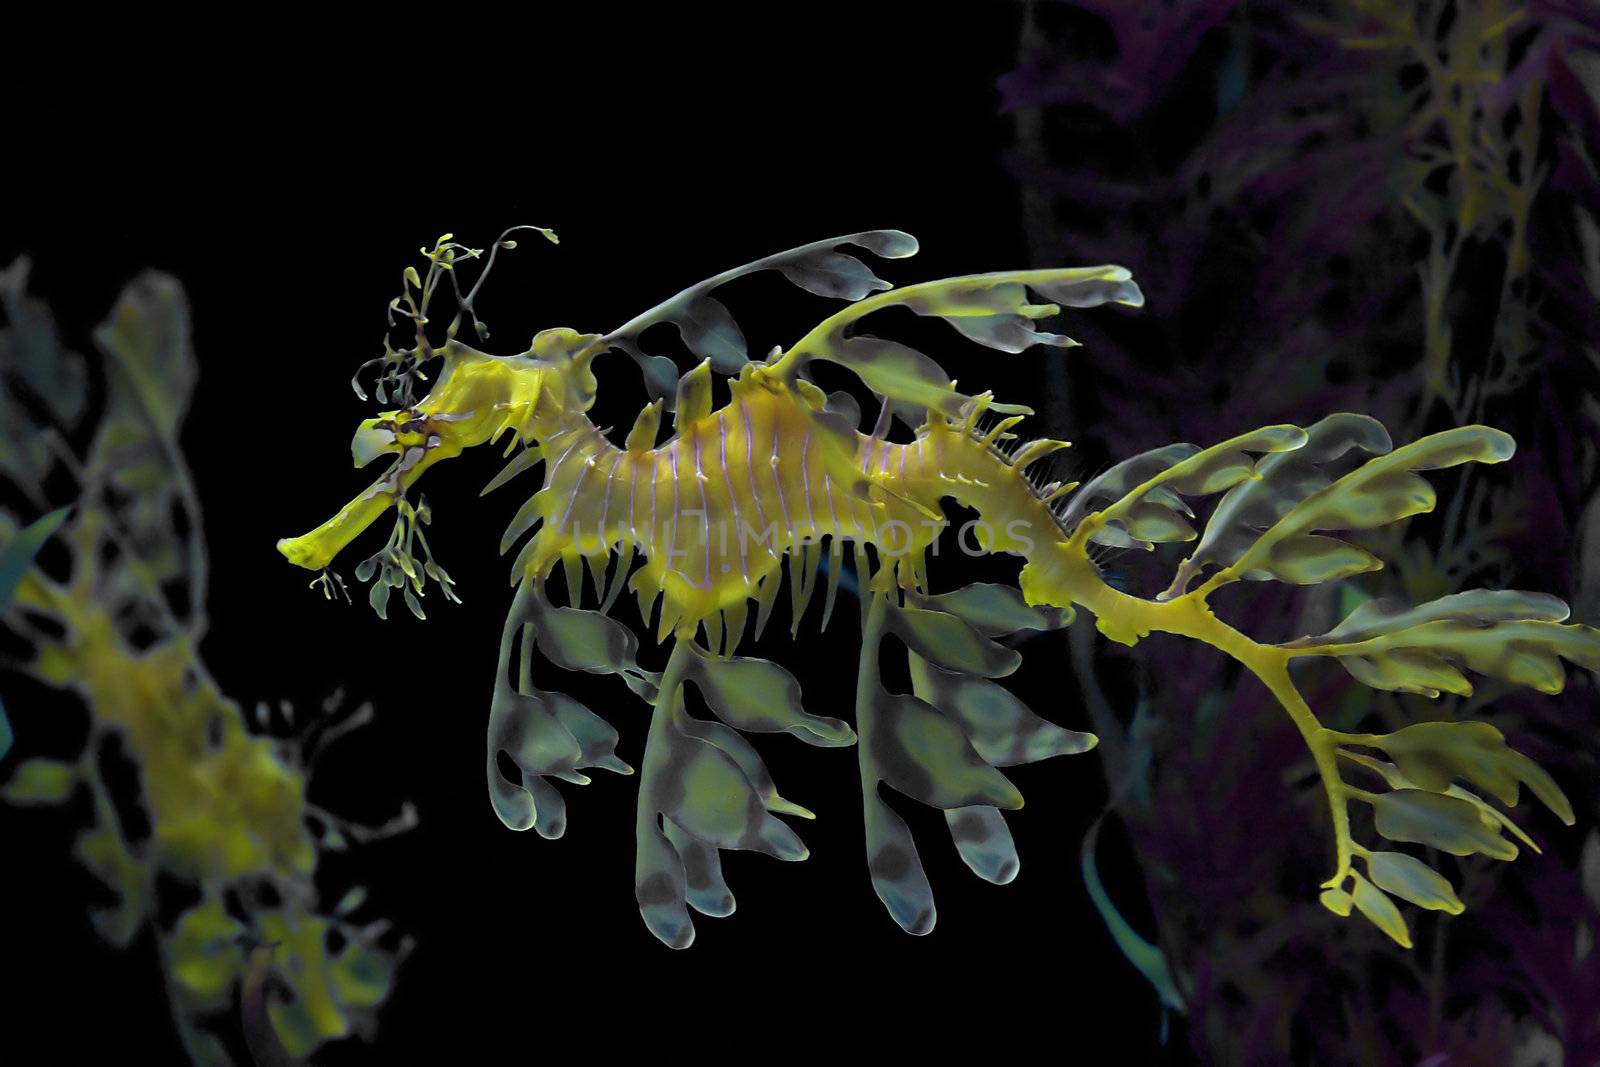 Leafy sea dragon photographed in Indonesia, 2009